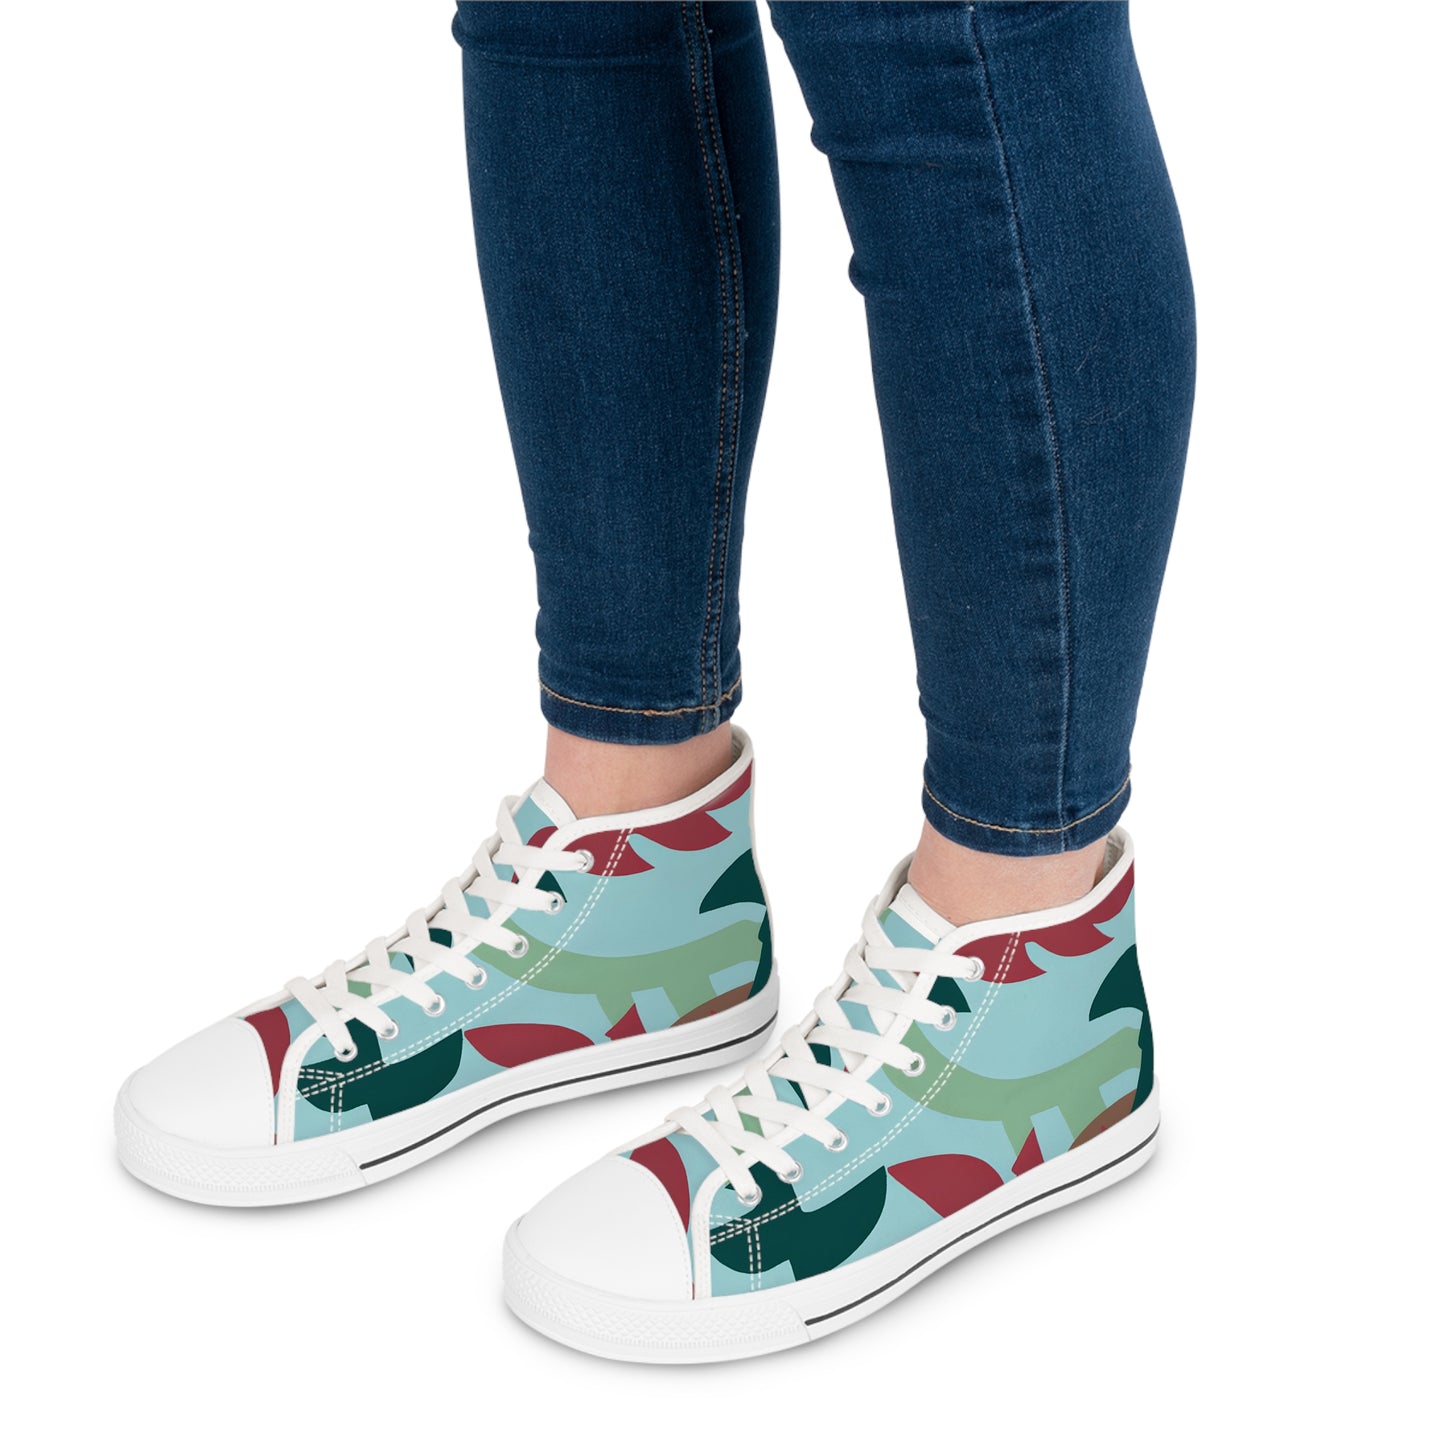 Chaparral Ione - Women's High-Top Sneakers